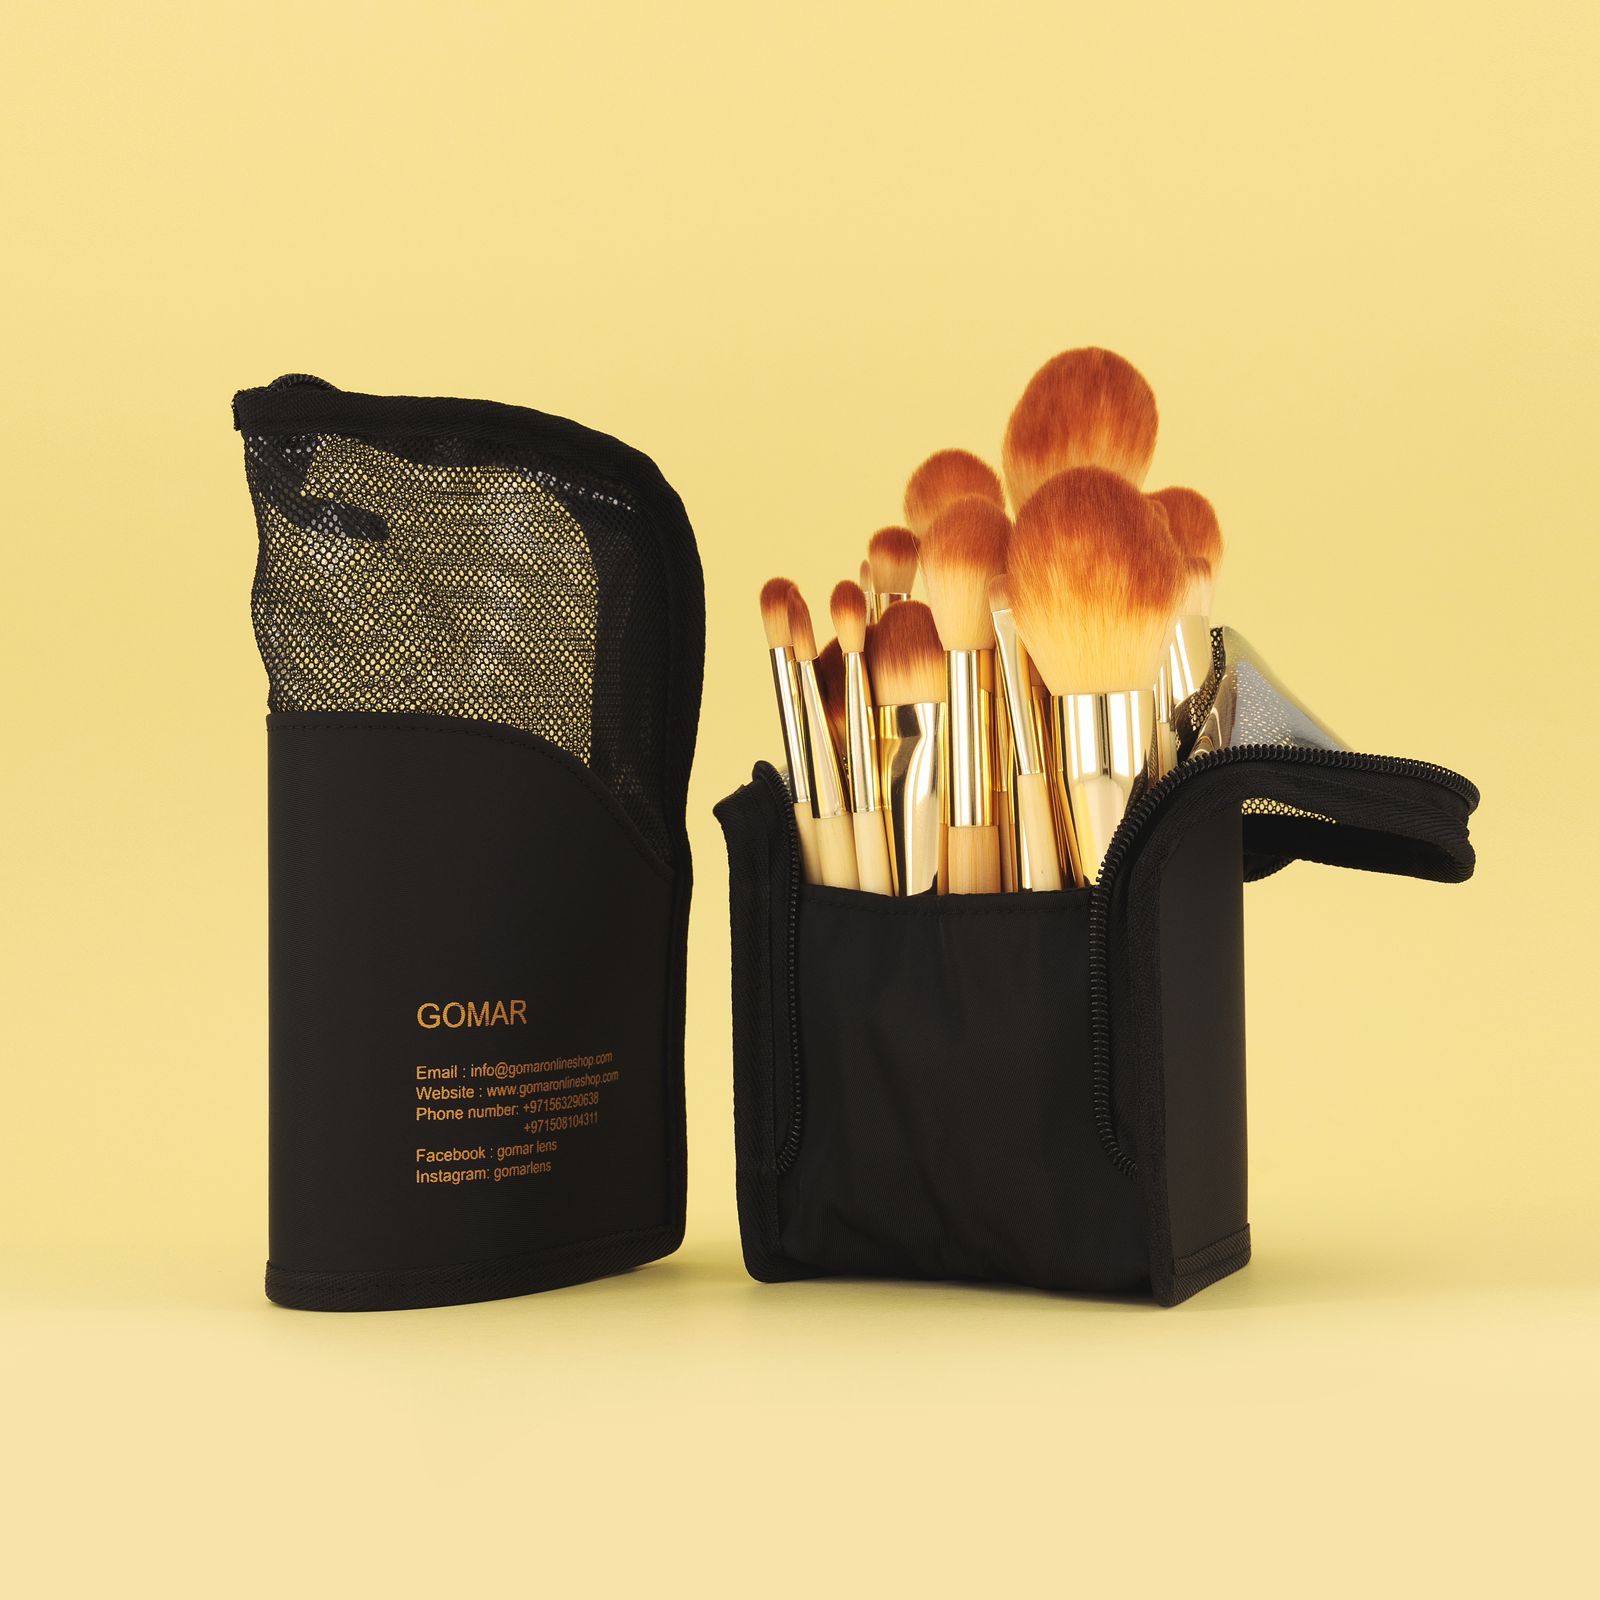 All-In Bag – contains 9 of the best makeup brushes of the Gomar bamboo makeup brush collection